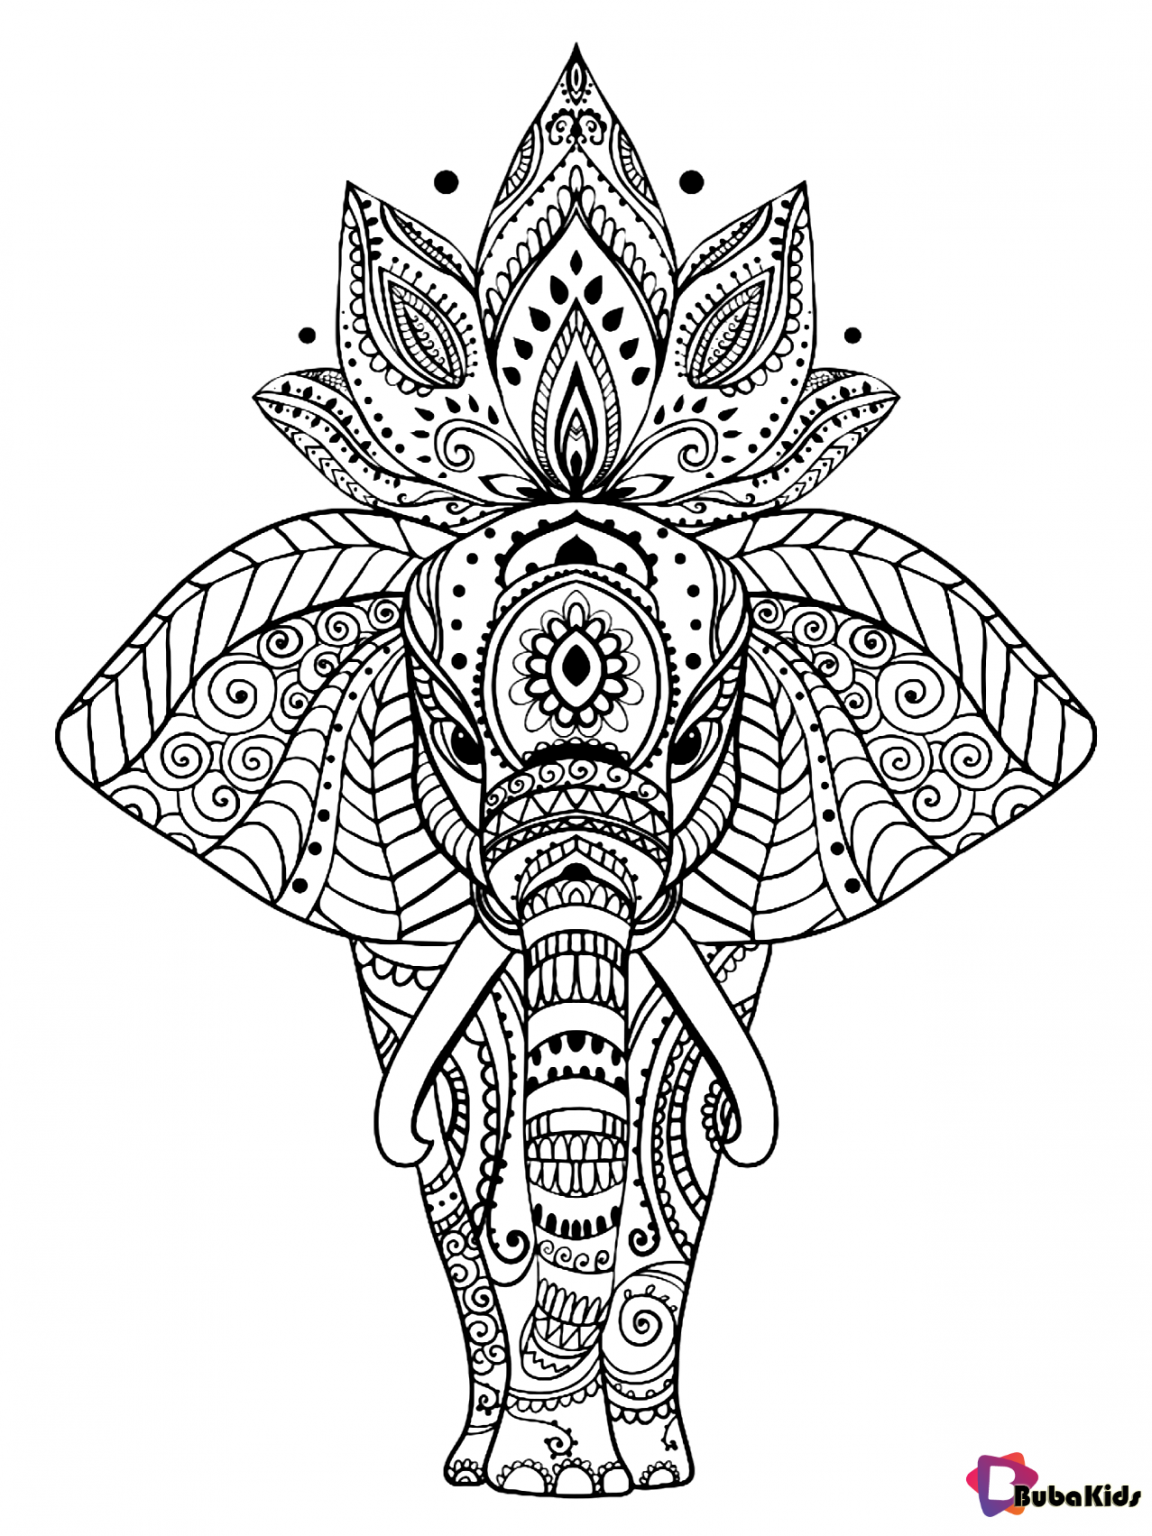 Animal elephant mandala coloring page for kids and adults ...